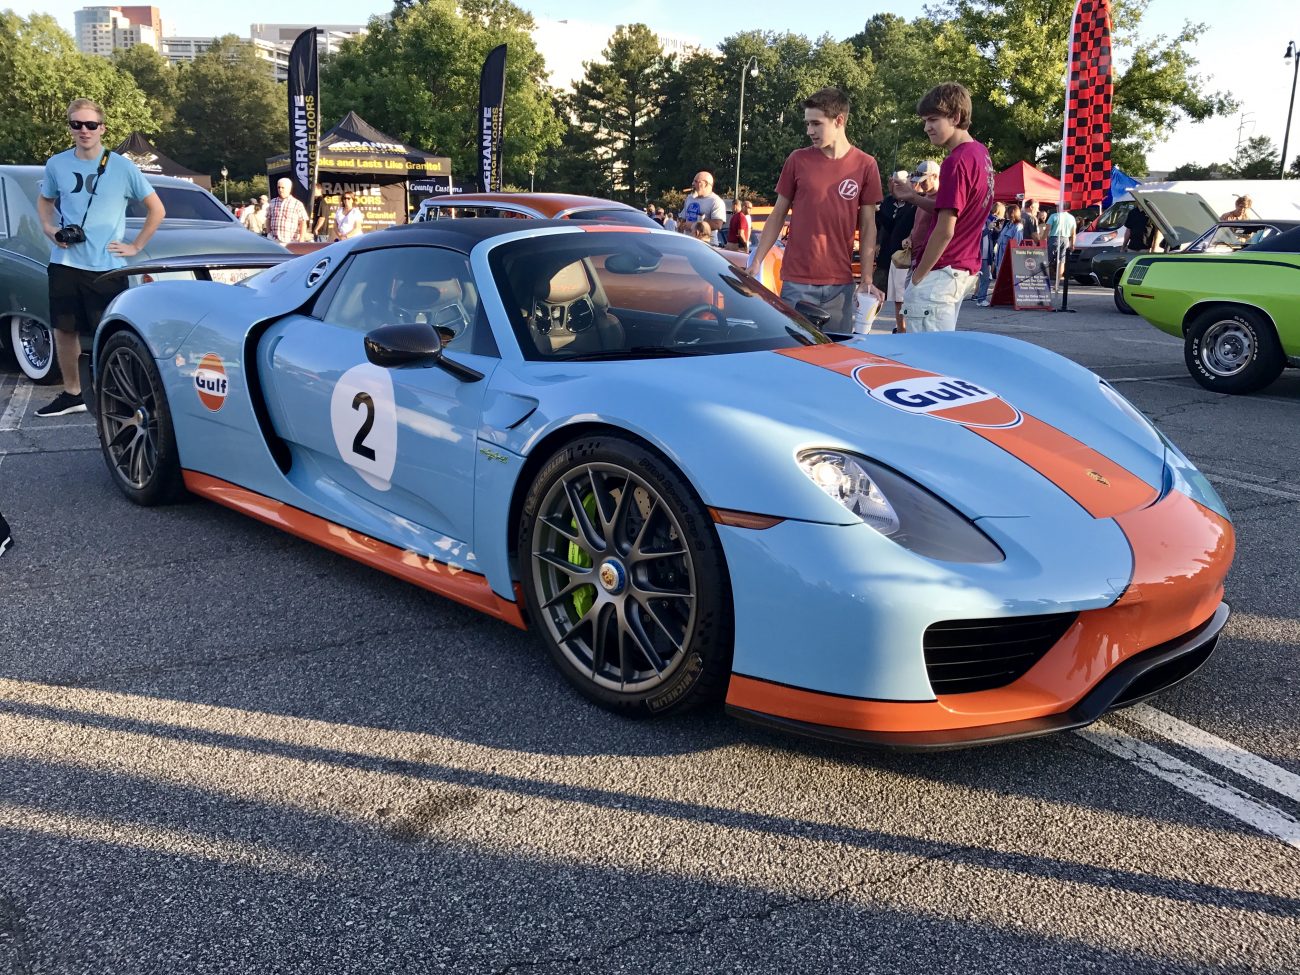 Visiting The Largest “Cars & Coffee” Event In North America